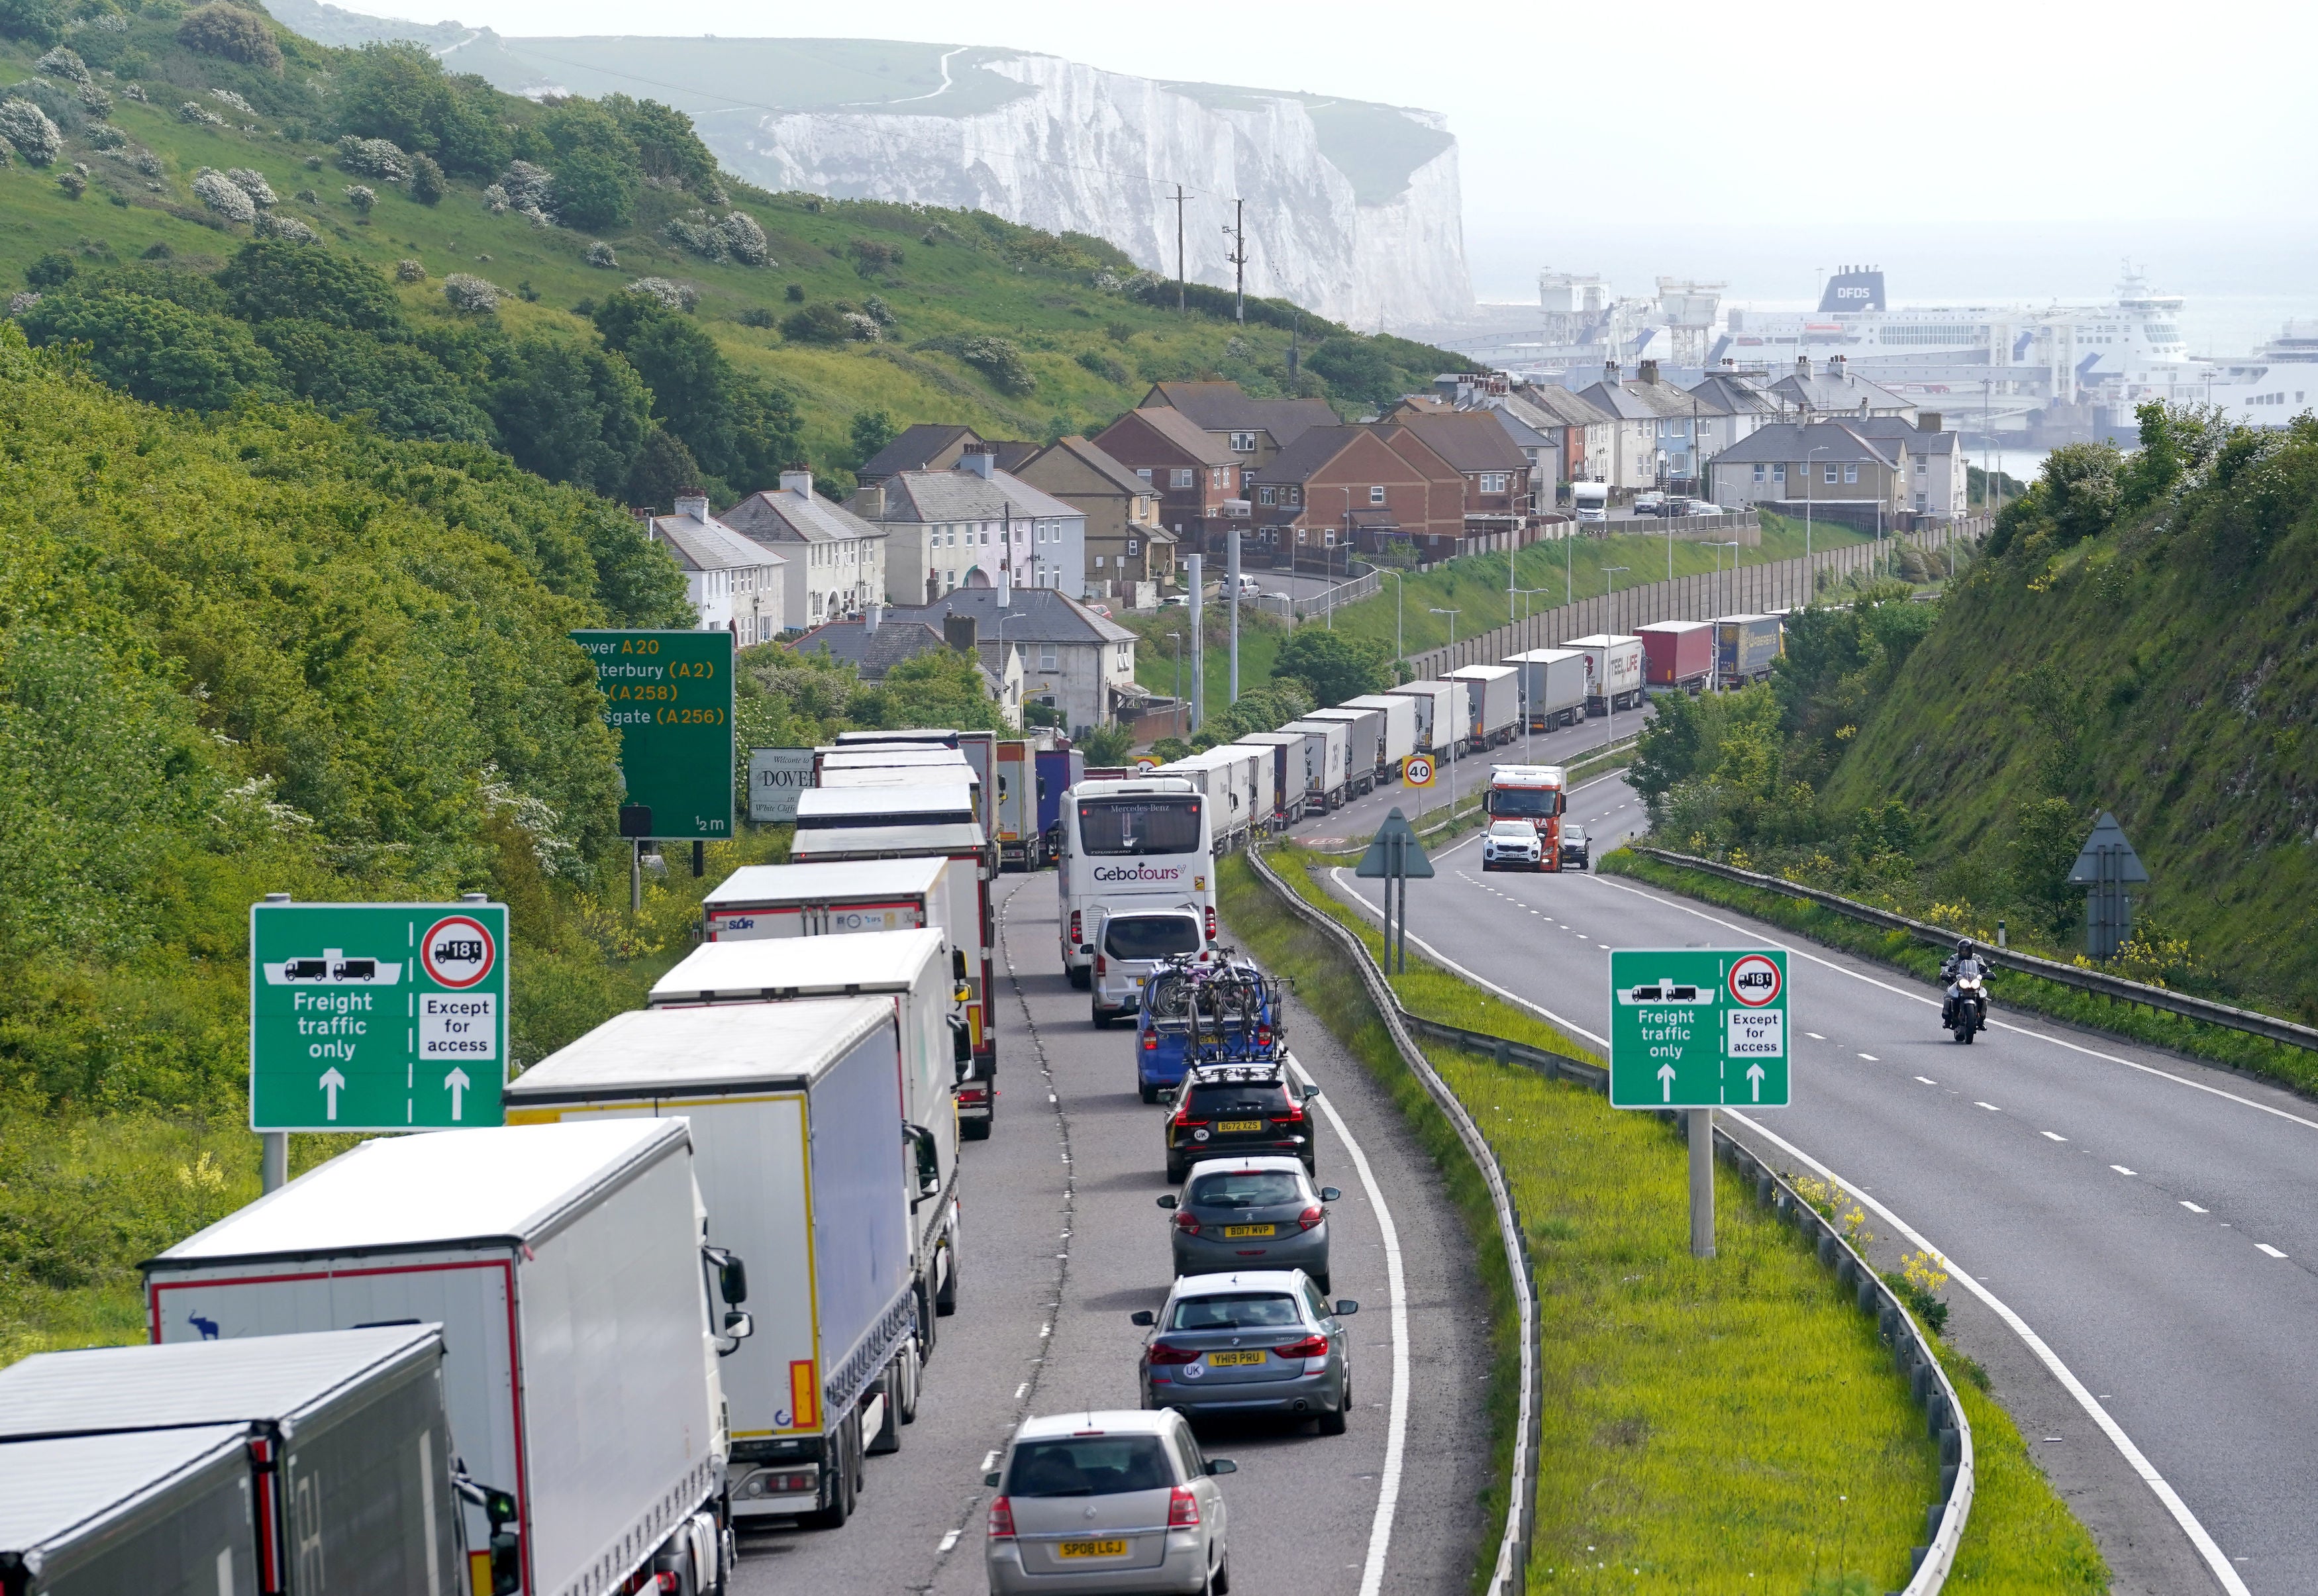 Dover has seen huge disruption from post-Brexit checks